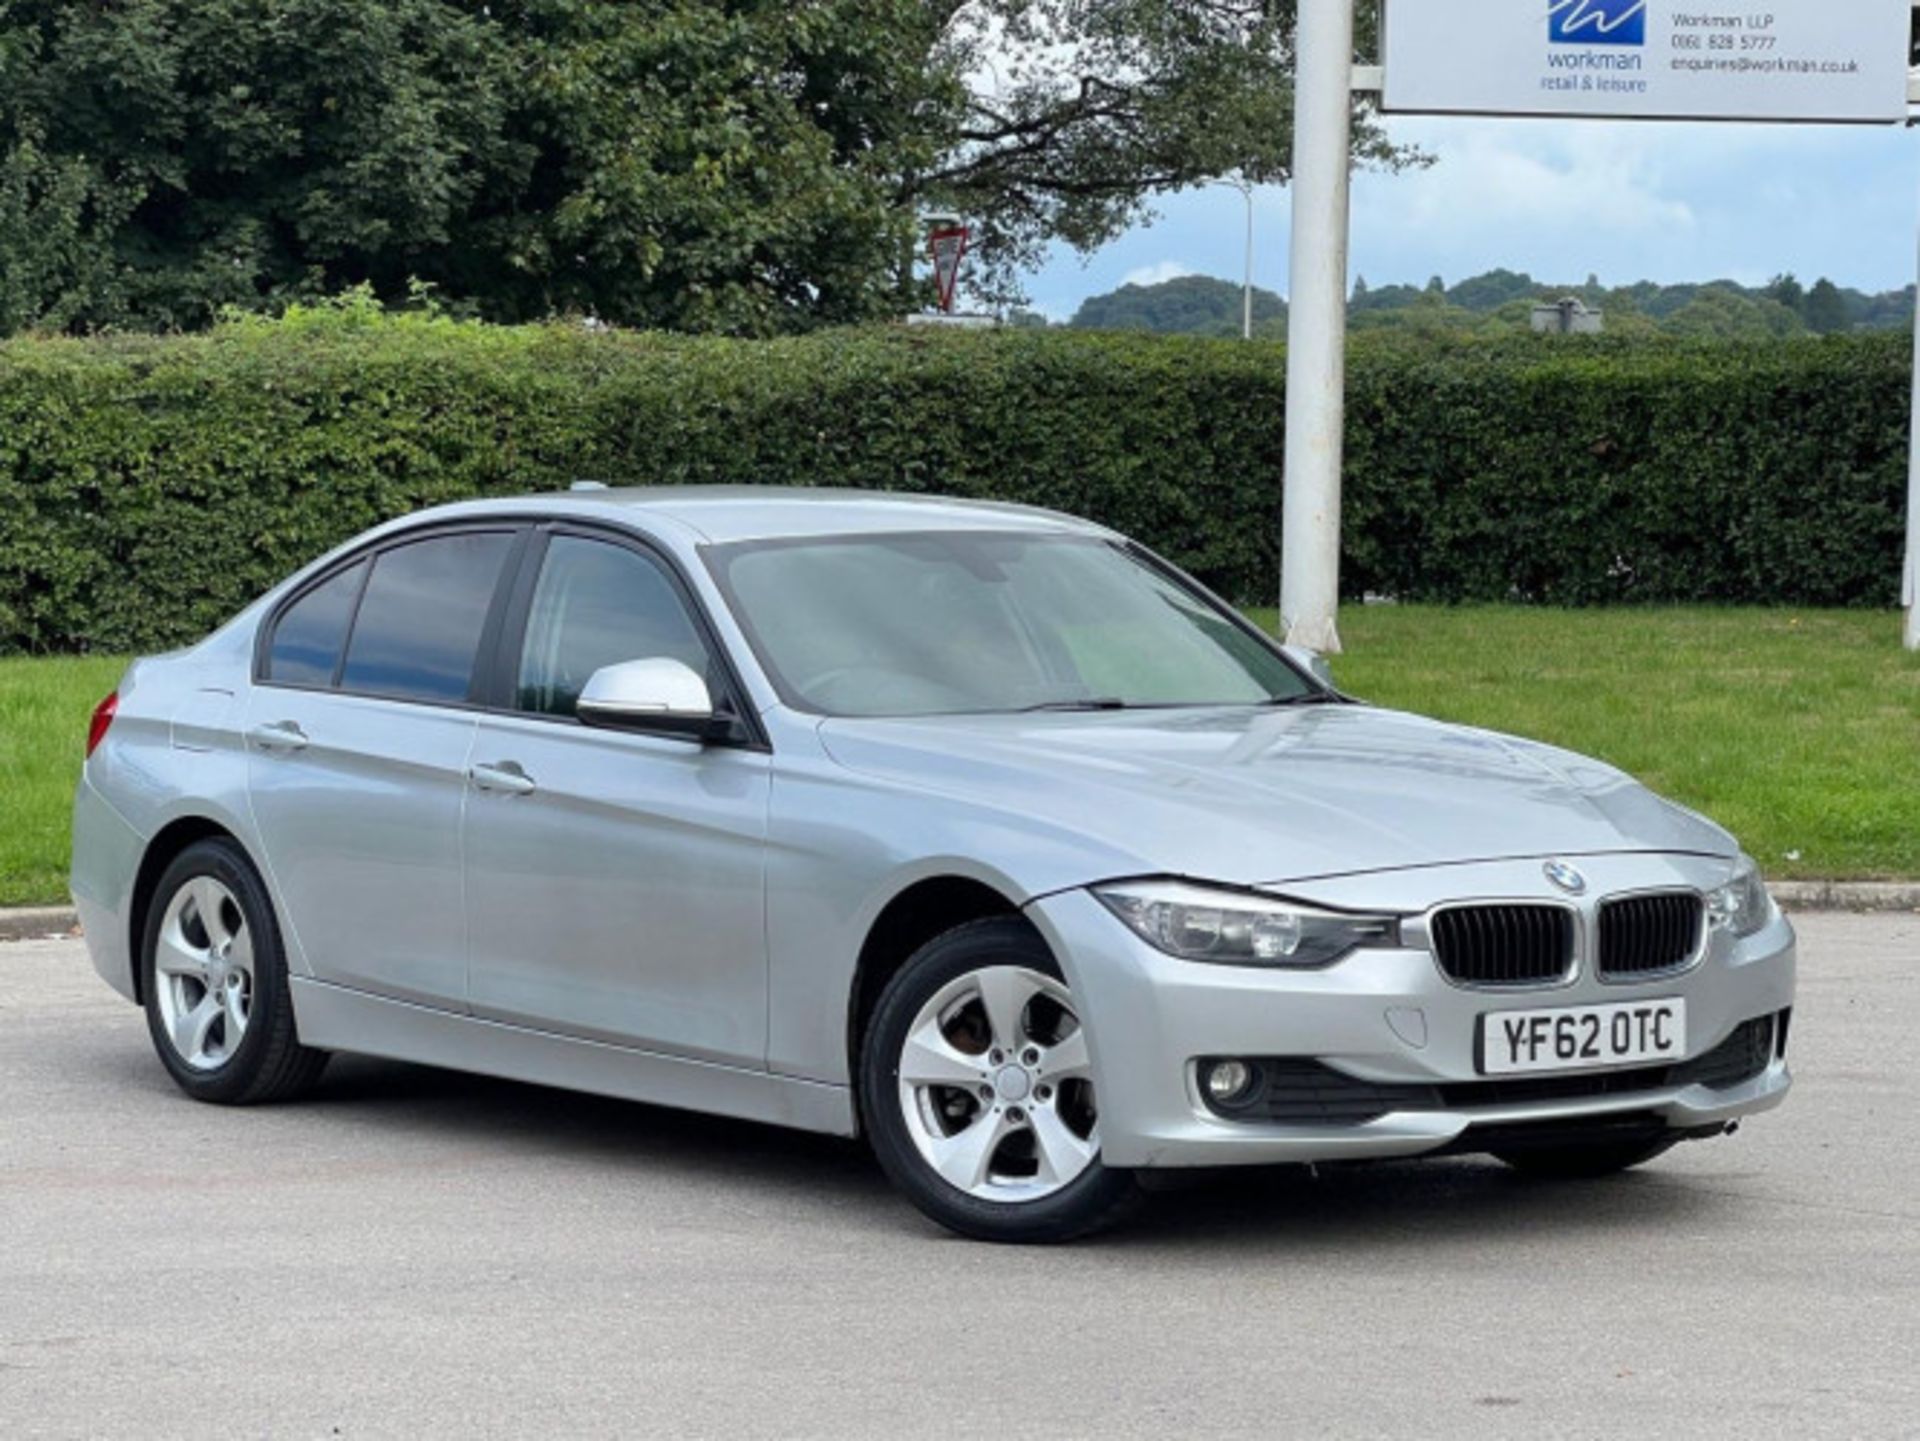 BMW 3 SERIES 2.0 DIESEL ED START STOP - A WELL-MAINTAINED GEM >>--NO VAT ON HAMMER--<< - Image 6 of 229